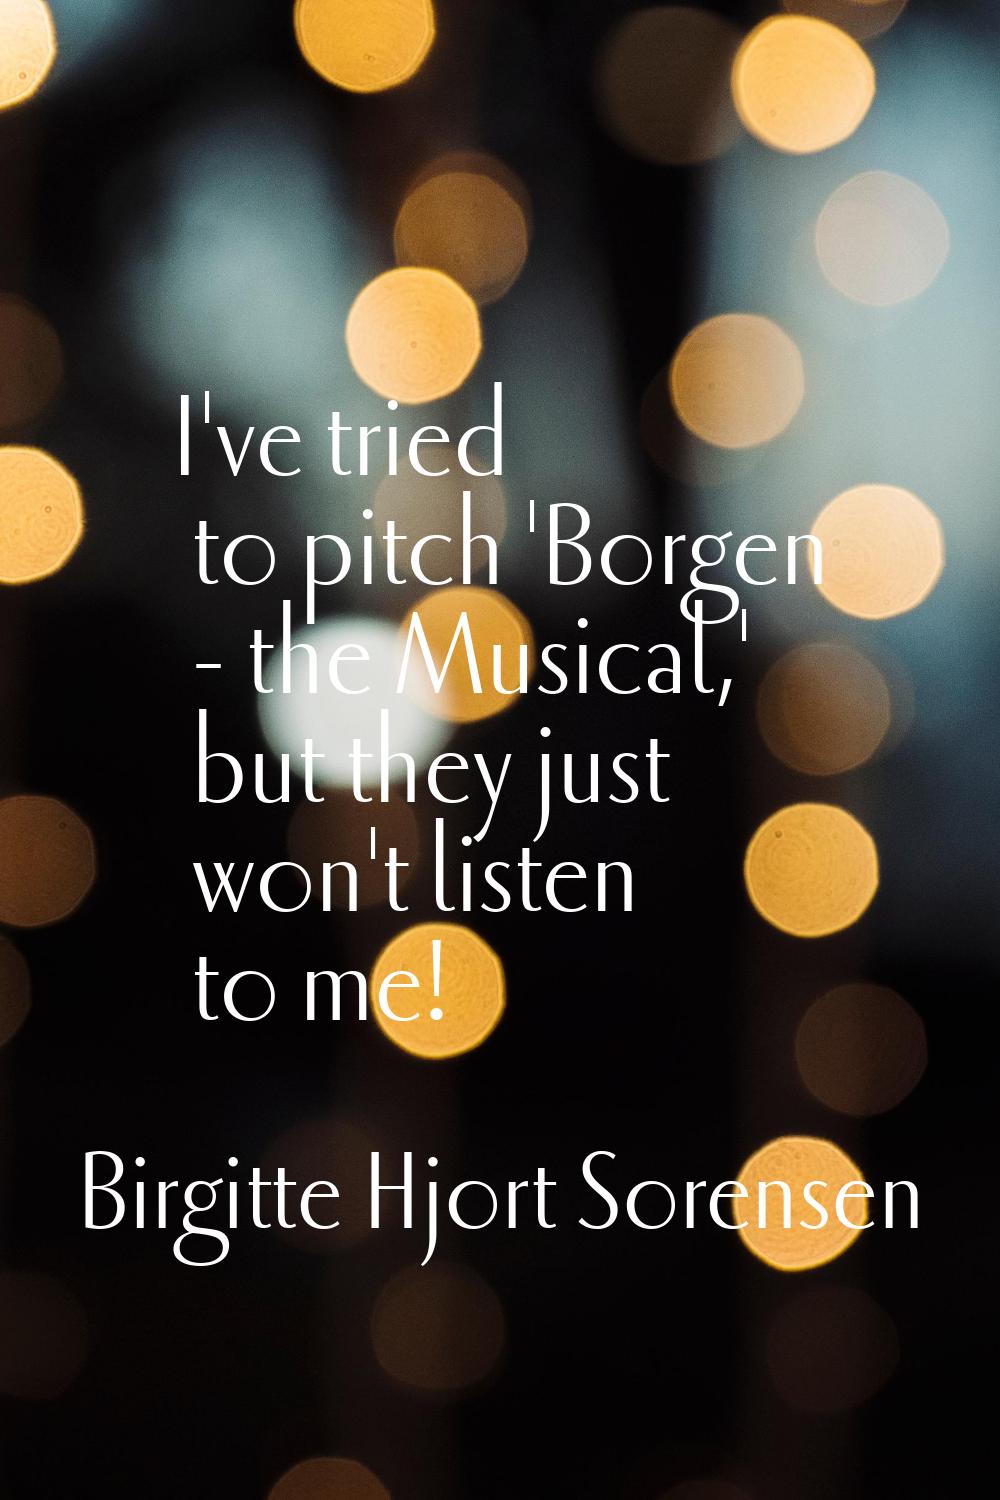 I've tried to pitch 'Borgen - the Musical,' but they just won't listen to me!